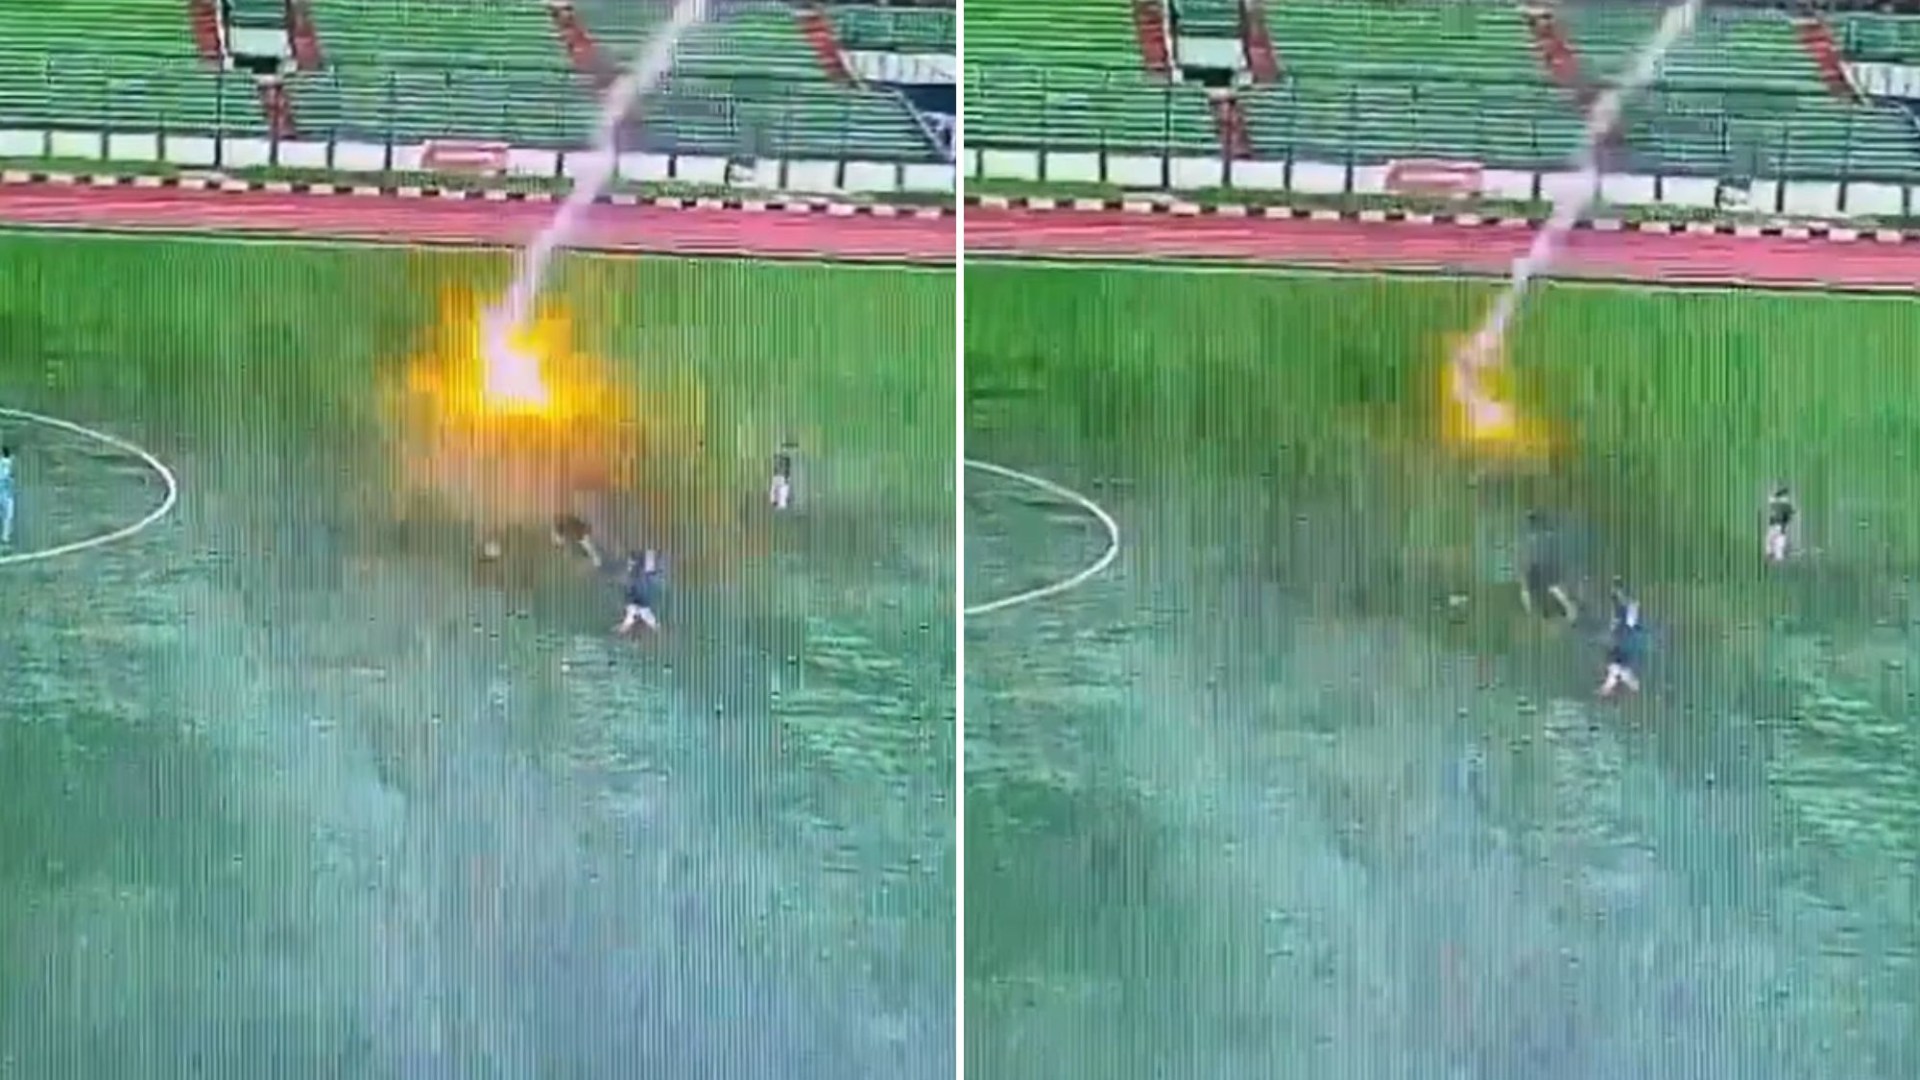 Sickening moment footballer is struck by lightning and killed in the middle of a match in front of horrified fans [Video]